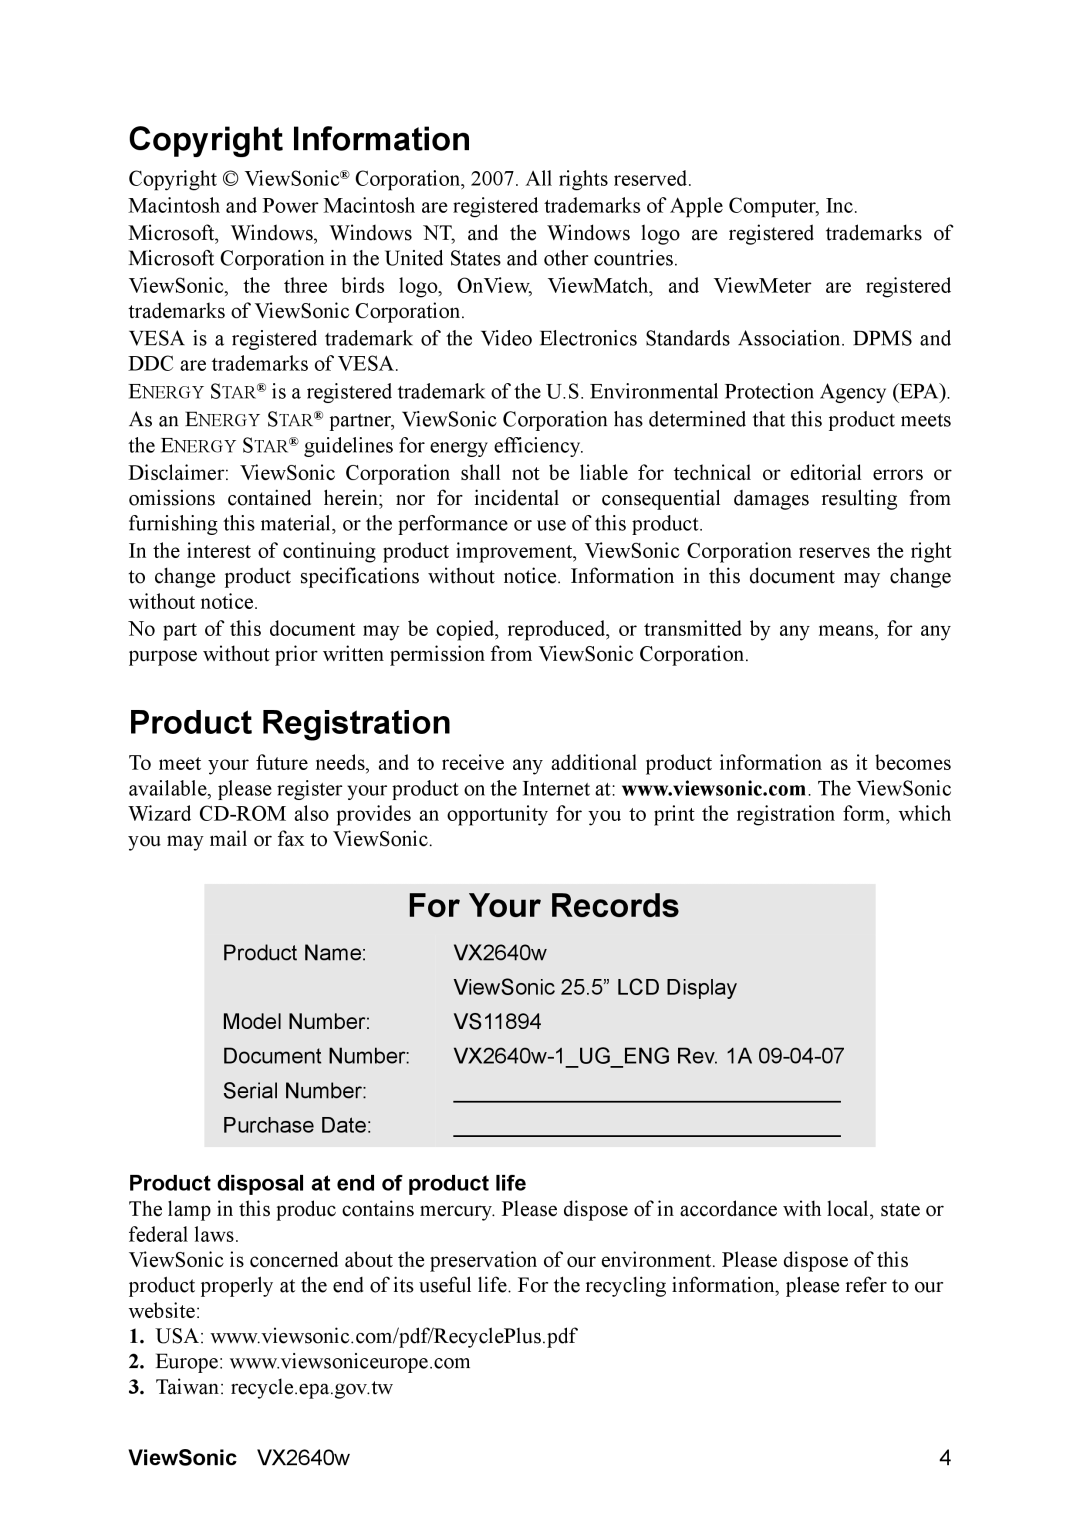 ViewSonic VX2640W Copyright Information, Product Registration For Your Records, Product disposal at end of product life 